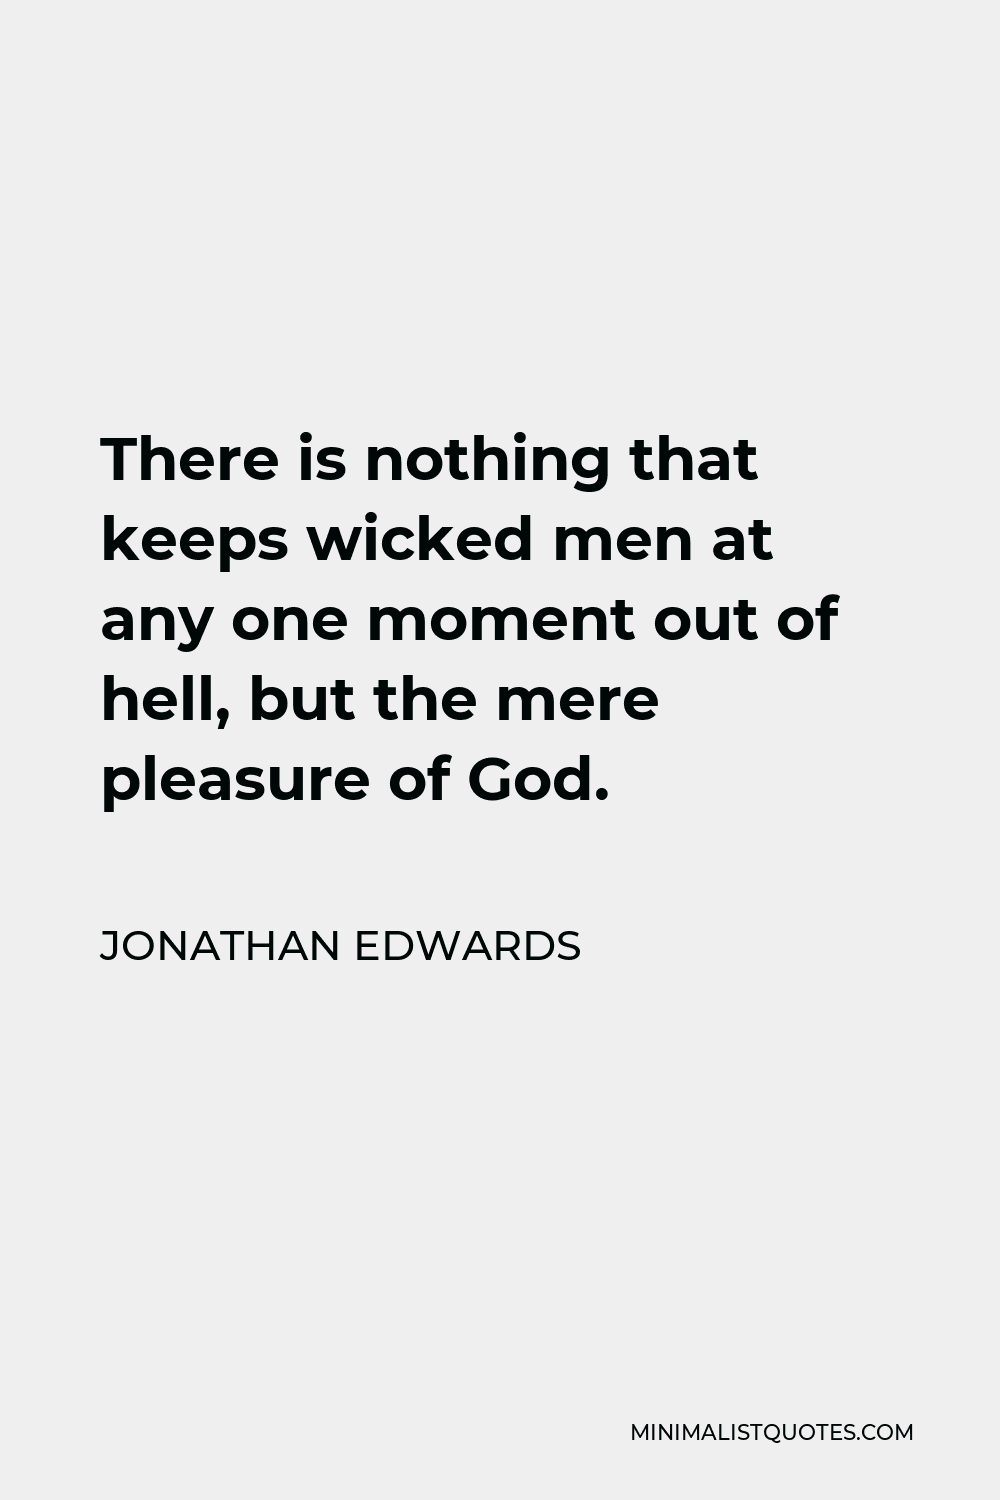 Jonathan Edwards Quote - There is nothing that keeps wicked men at any one moment out of hell, but the mere pleasure of God.